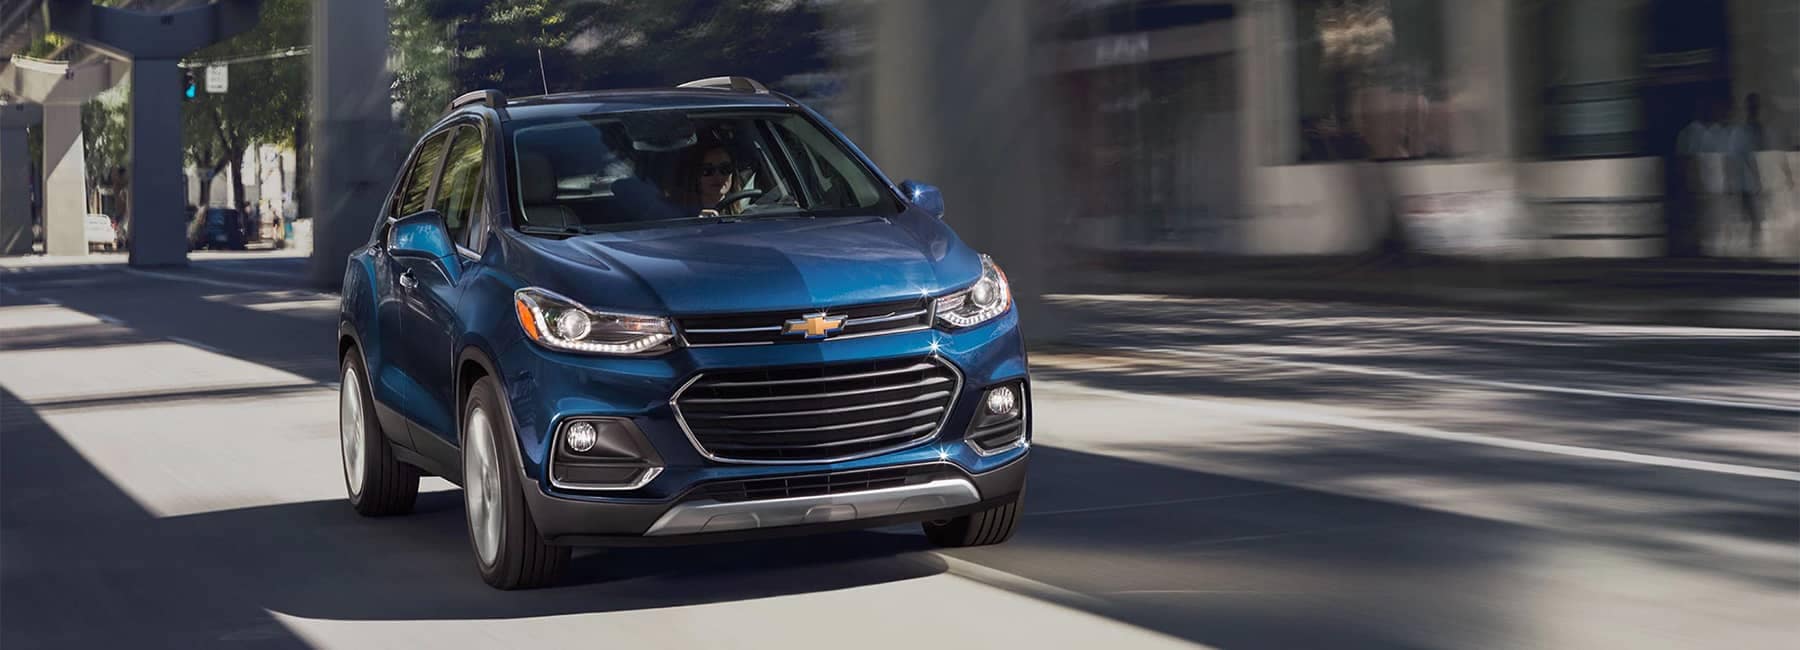 2020 Chevy Trax Compact SUV Dual Port Grille